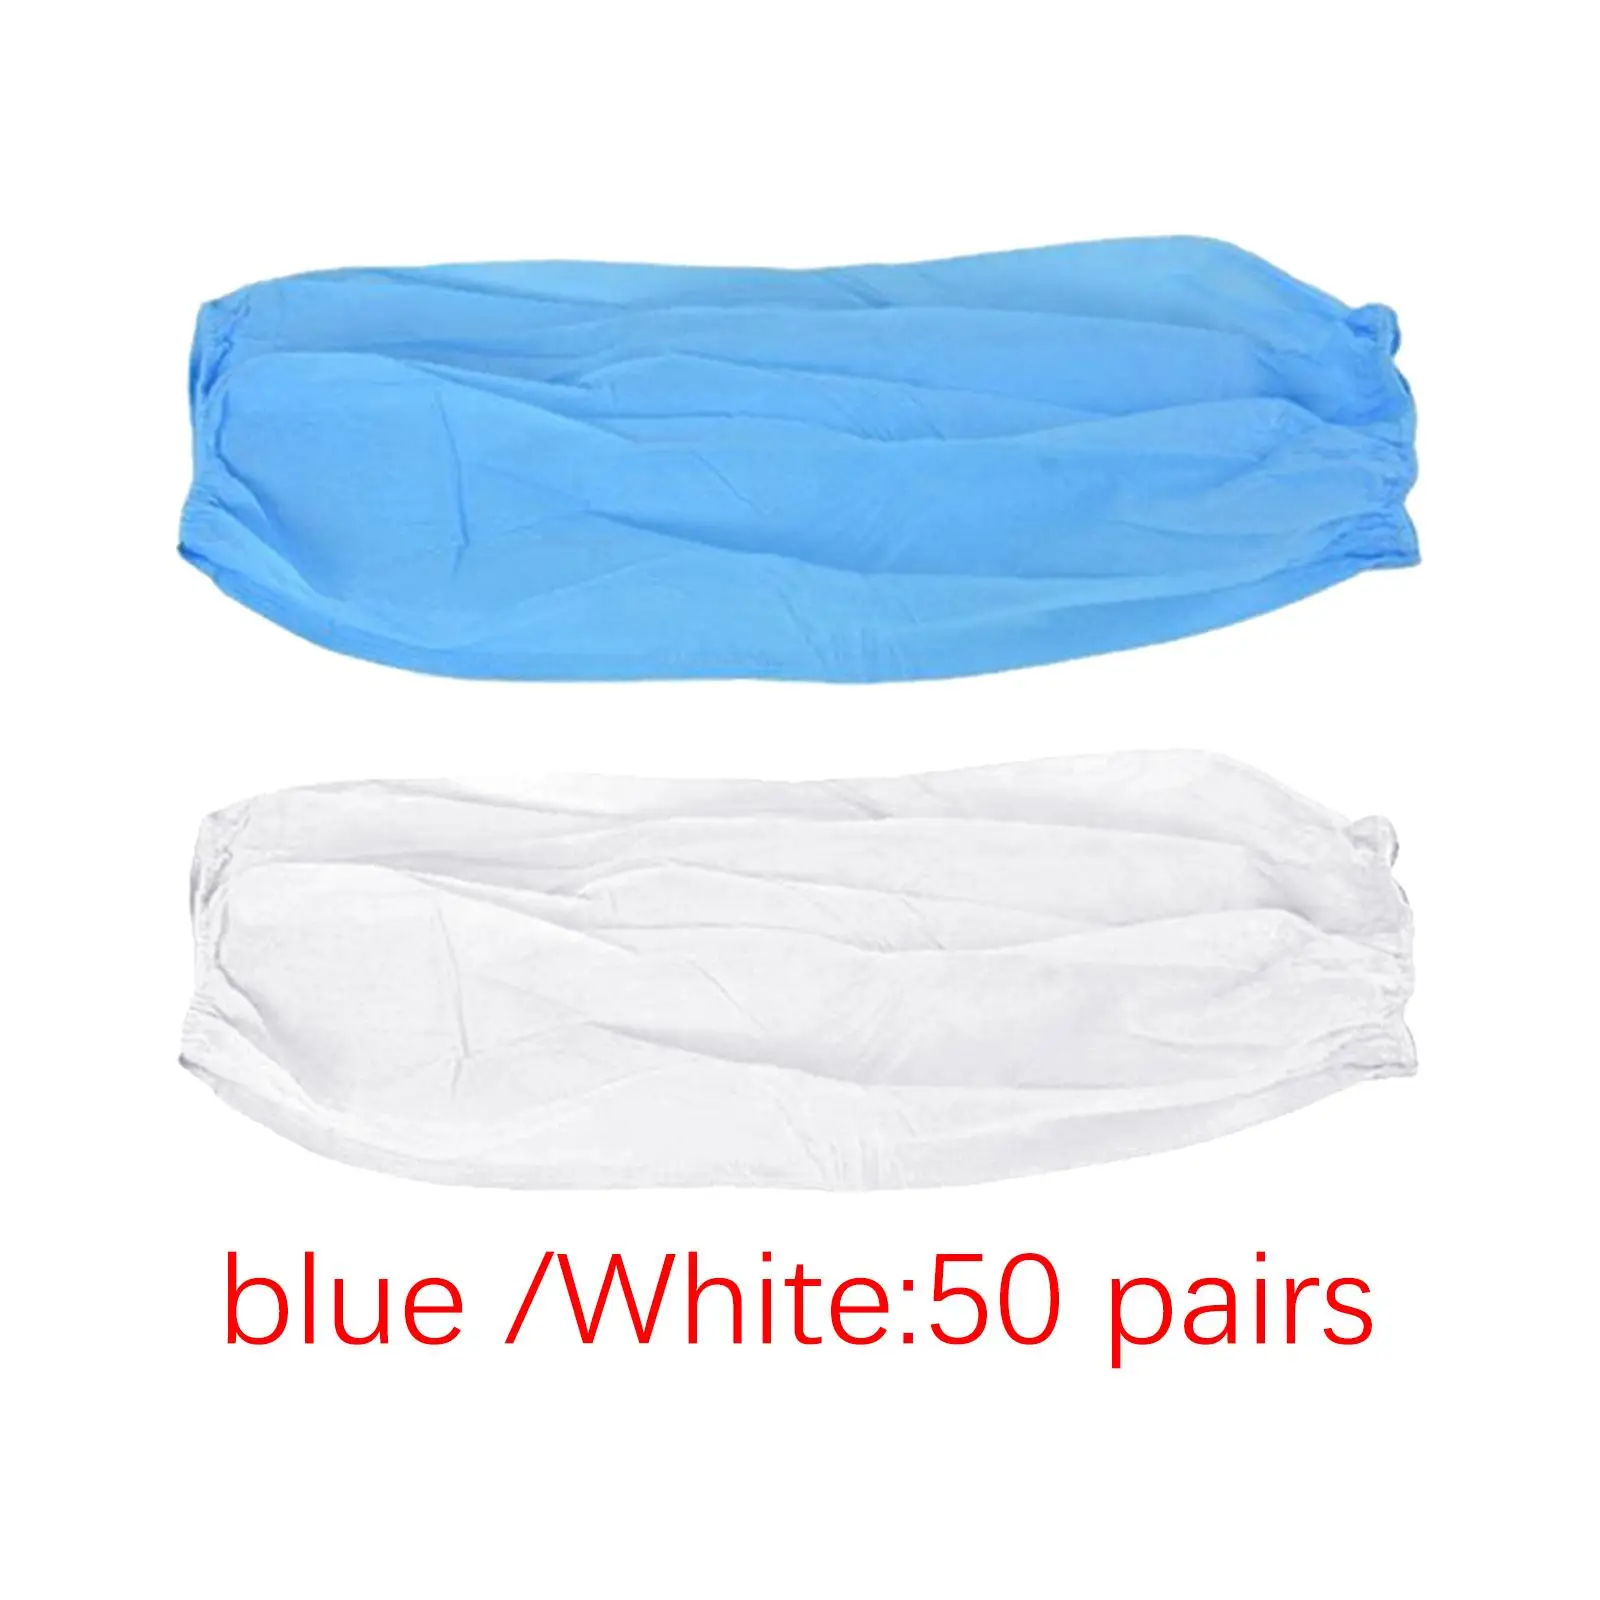 100 Pieces Disposable Arms Sleeves Covers Non Woven Fabric Durable Professional Lightweight